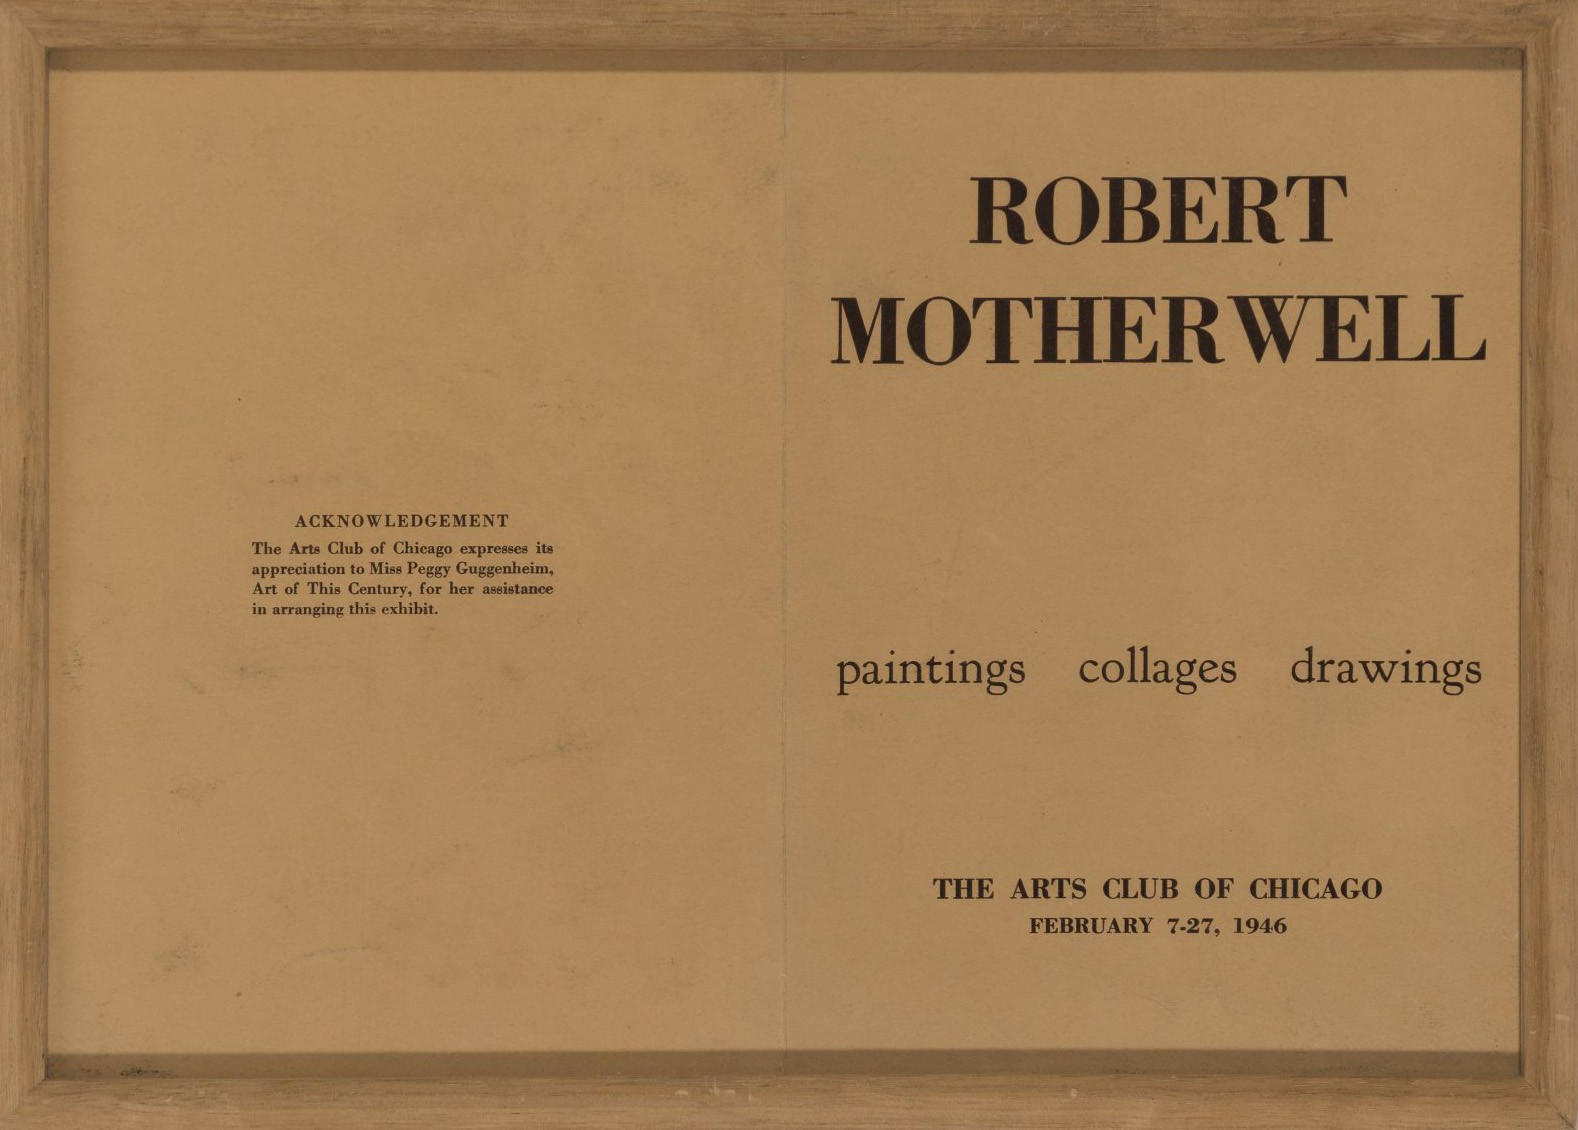 Cover of the catalogue for Motherwell’s solo exhibition at the Arts Club of Chicago, February 1946